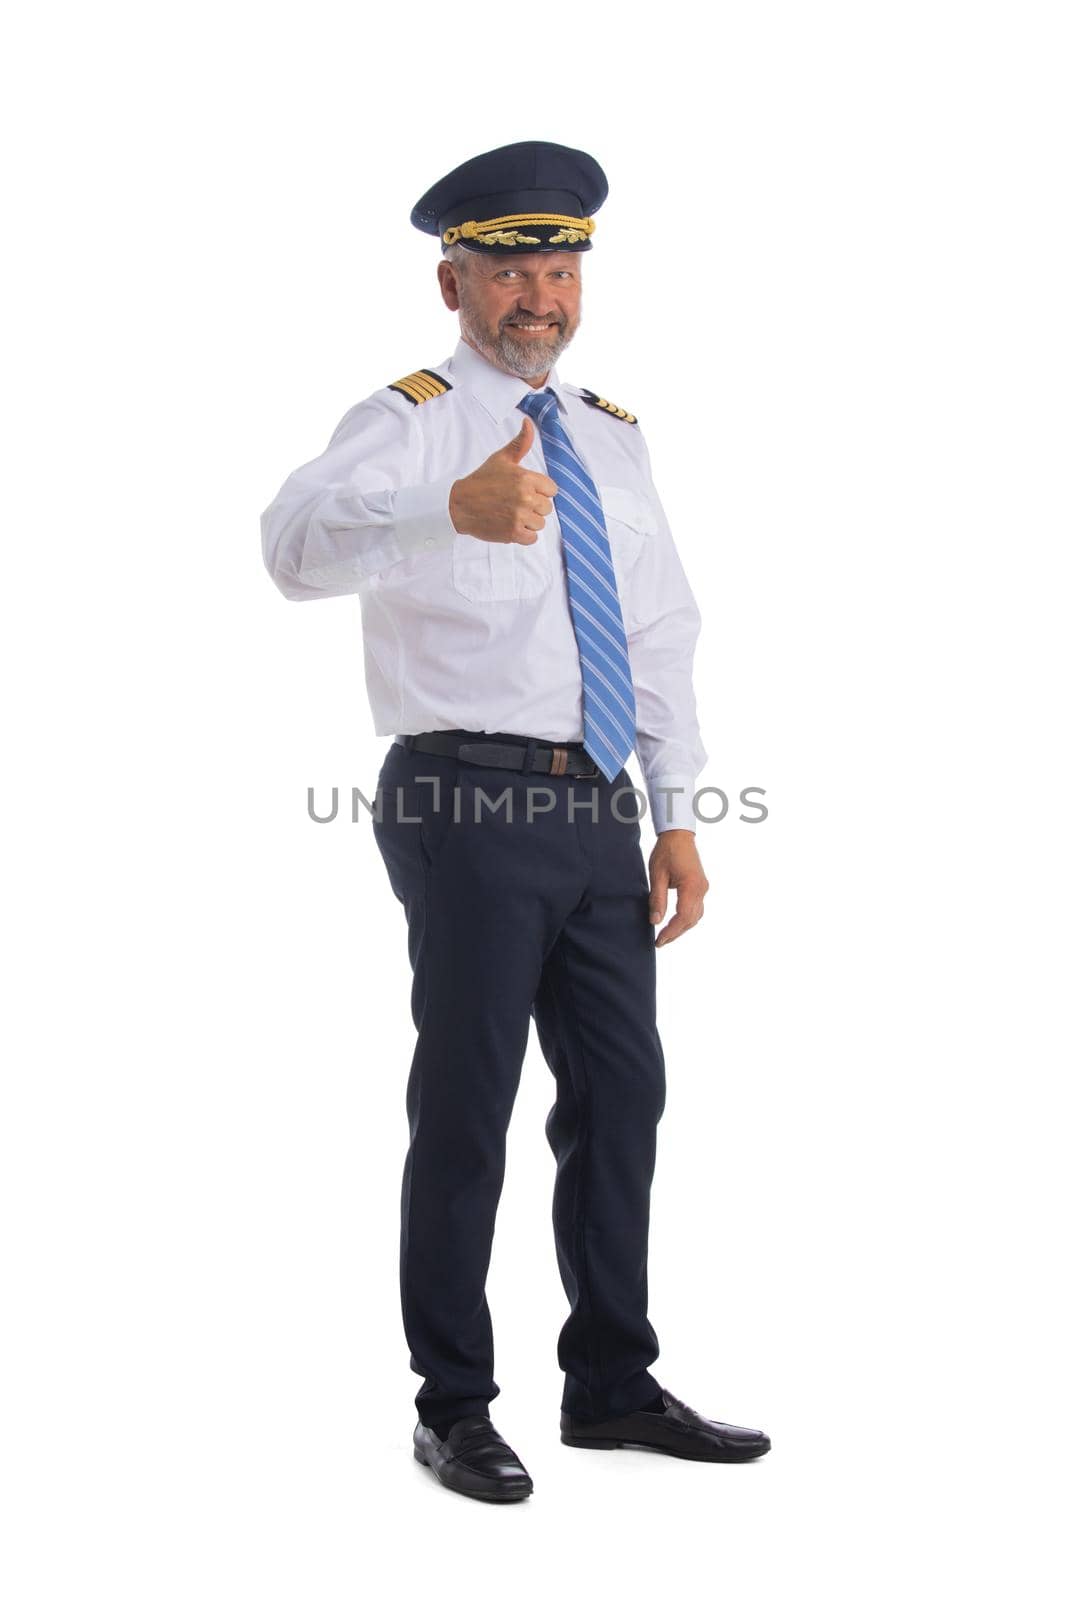 Cheerful airline pilot wearing uniform with epaulets showing thumb up gesture of approval, standing isolated on white background.